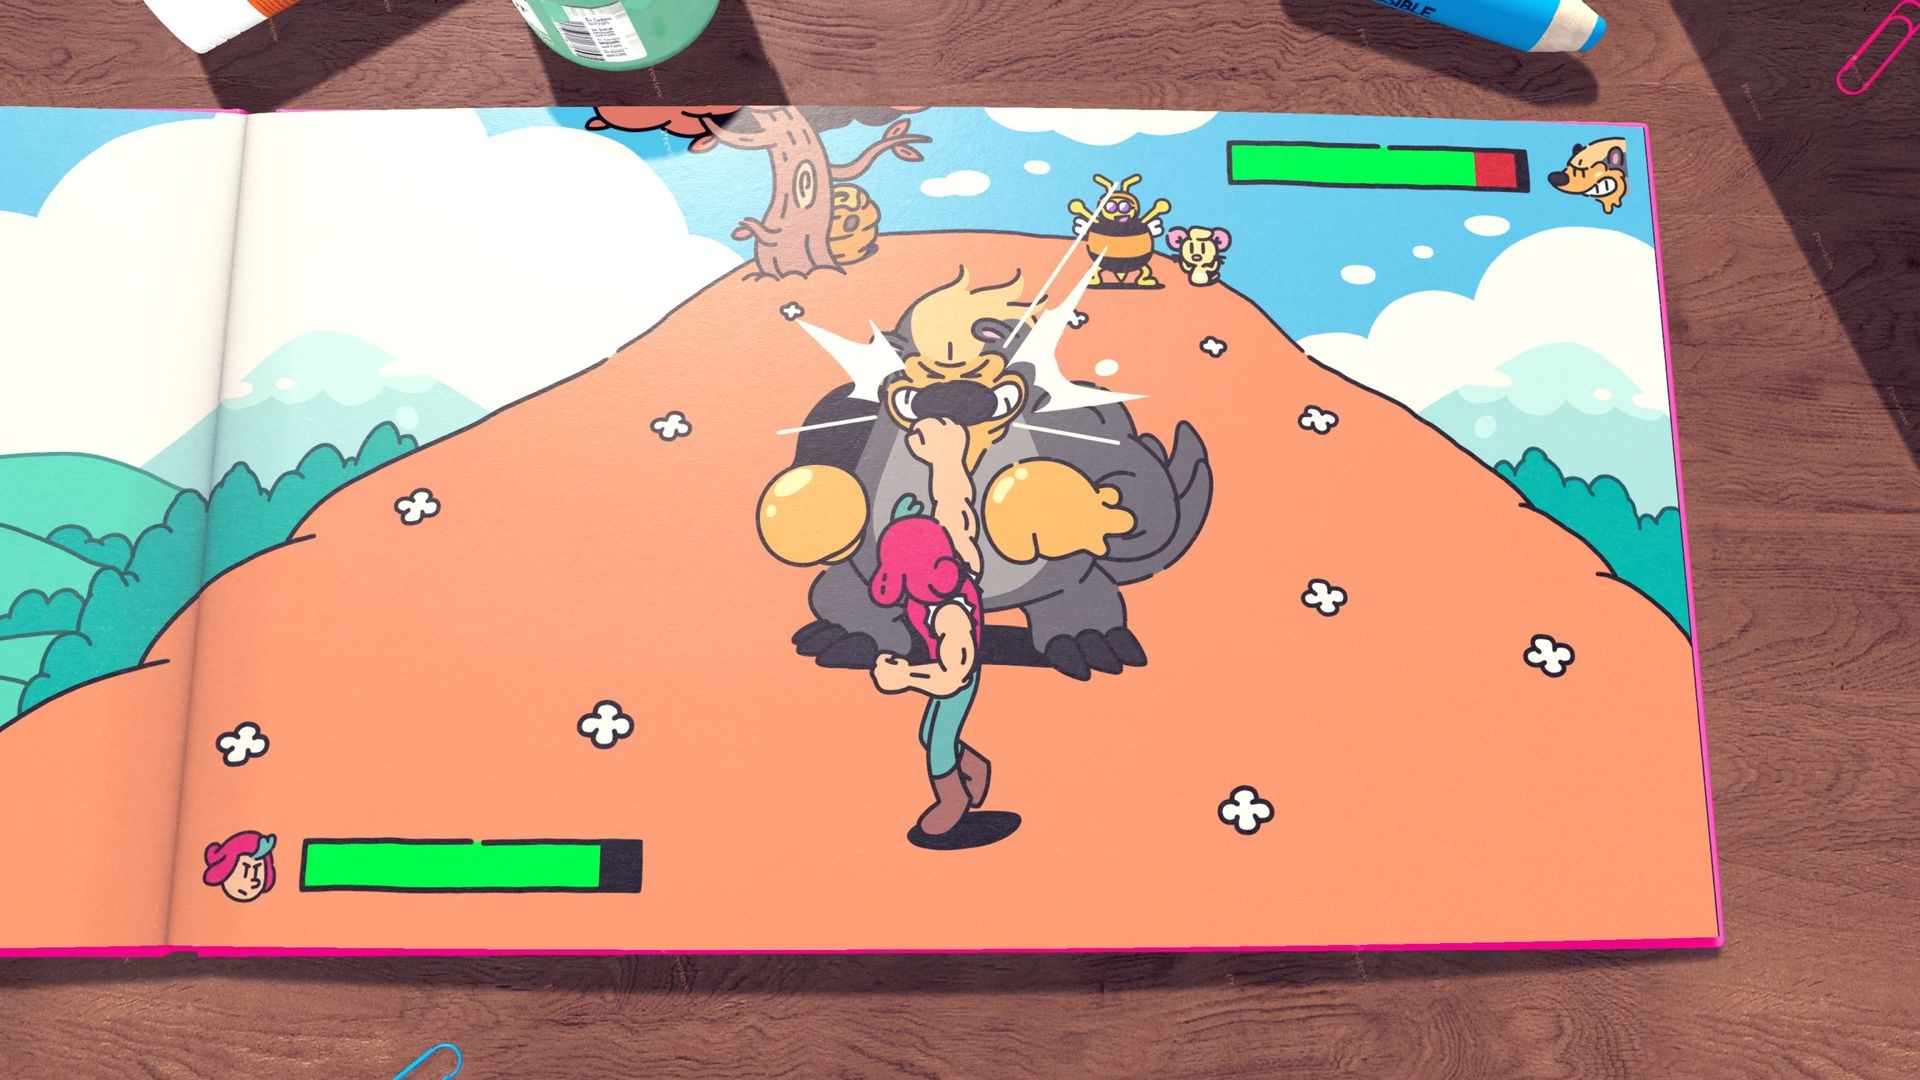 download the plucky squire steam